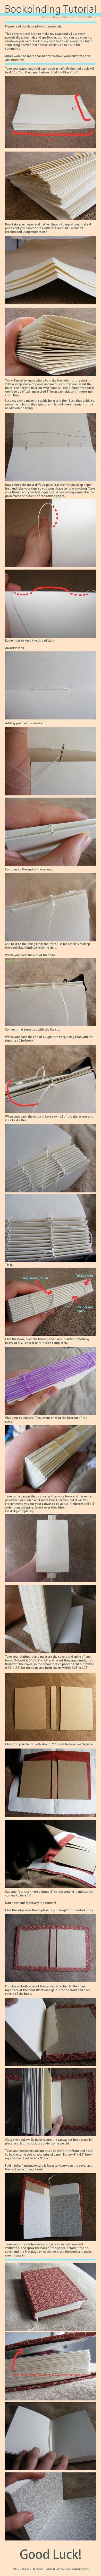 BOOK BINDING! I must try this.